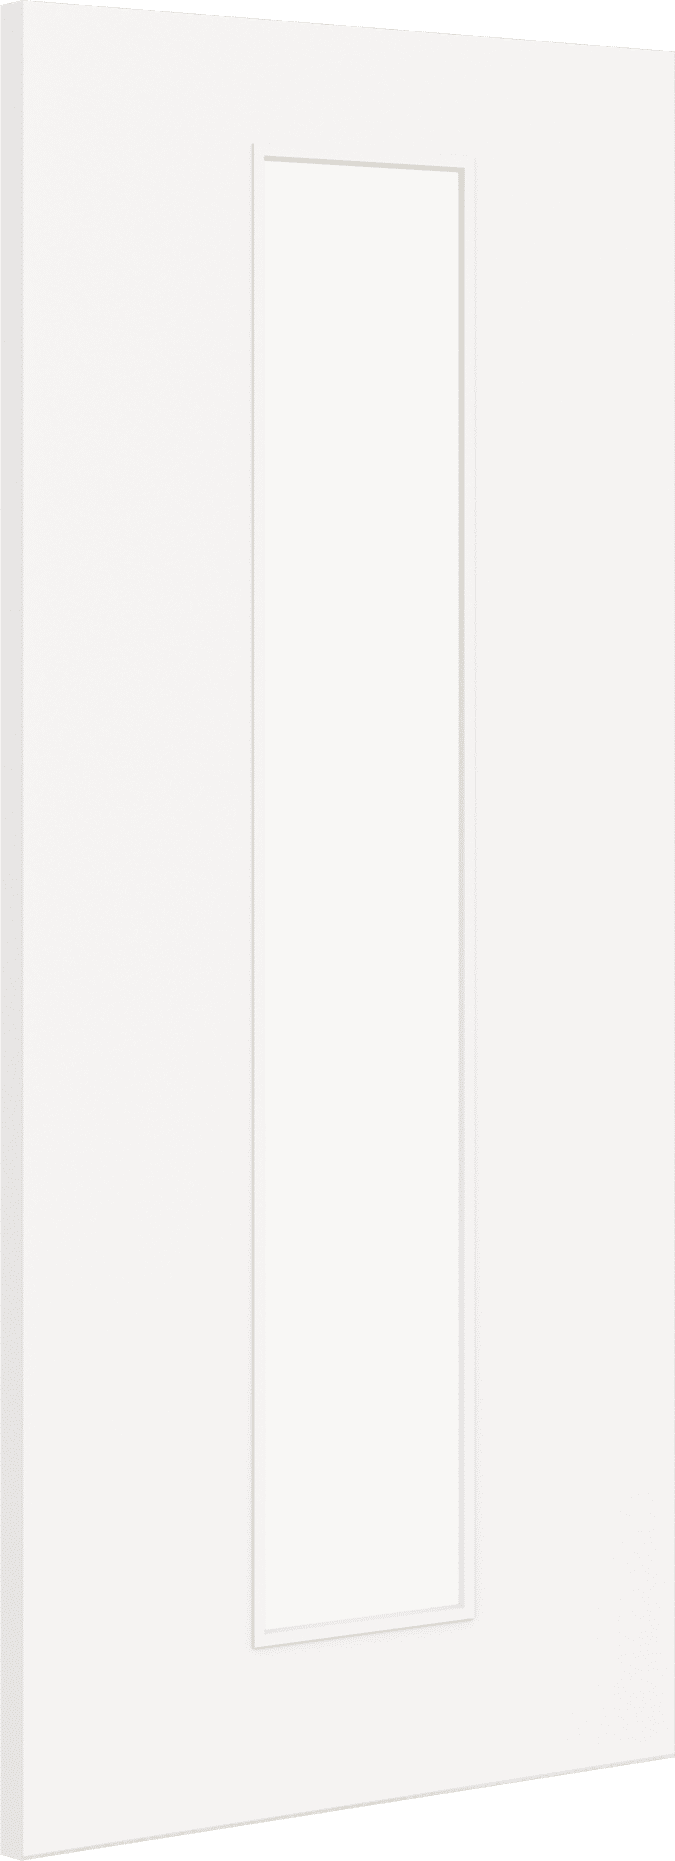 1981mm x 838mm x 44mm (33") Architectural Paint Grade White 10 Frosted Glazed Fire Door Blank